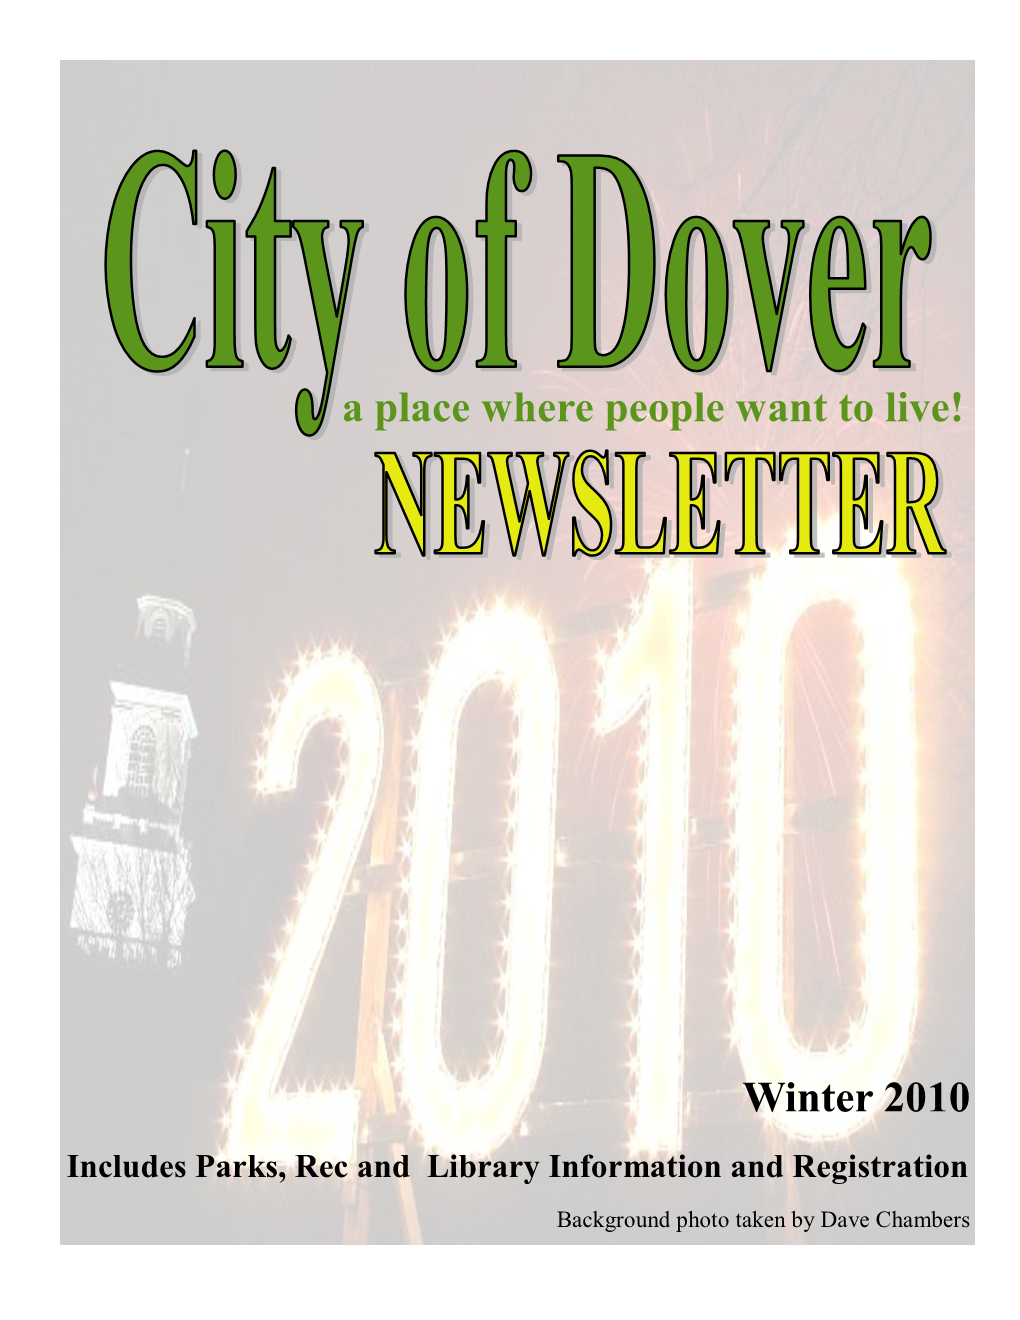 Winter 2010 Includes Parks, Rec and Library Information and Registration